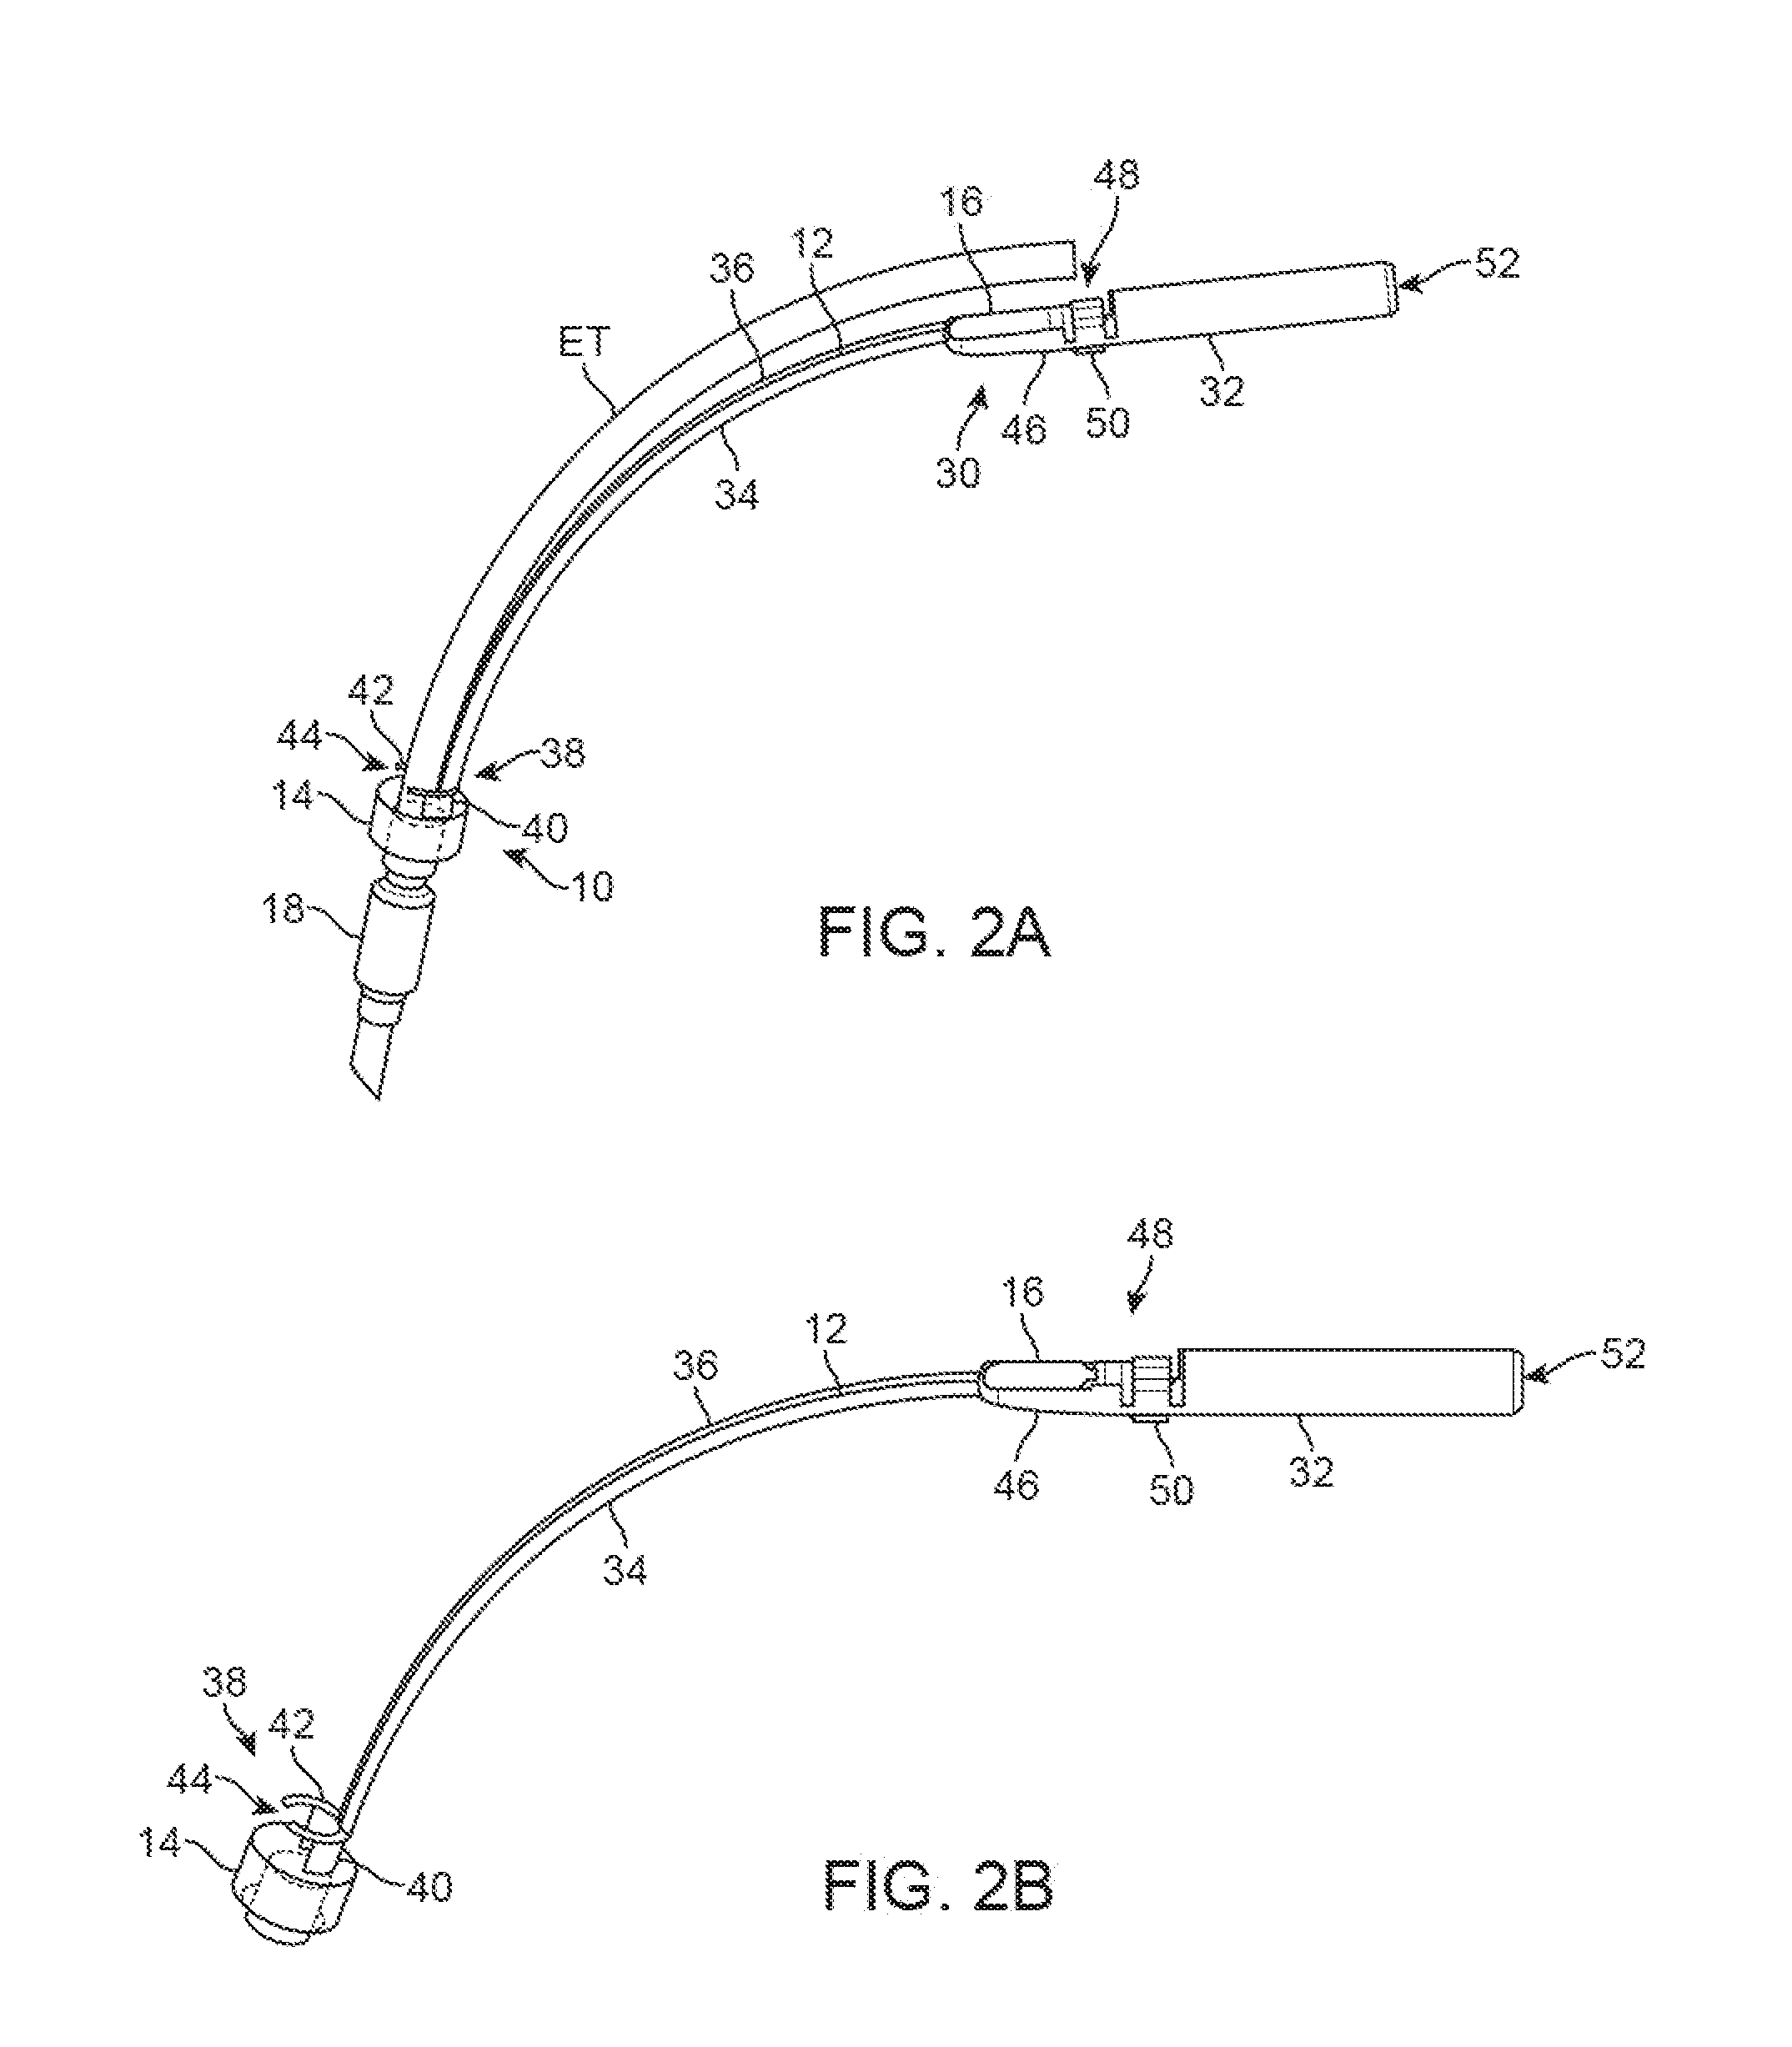 Devices and methods for preventing tracheal aspiration